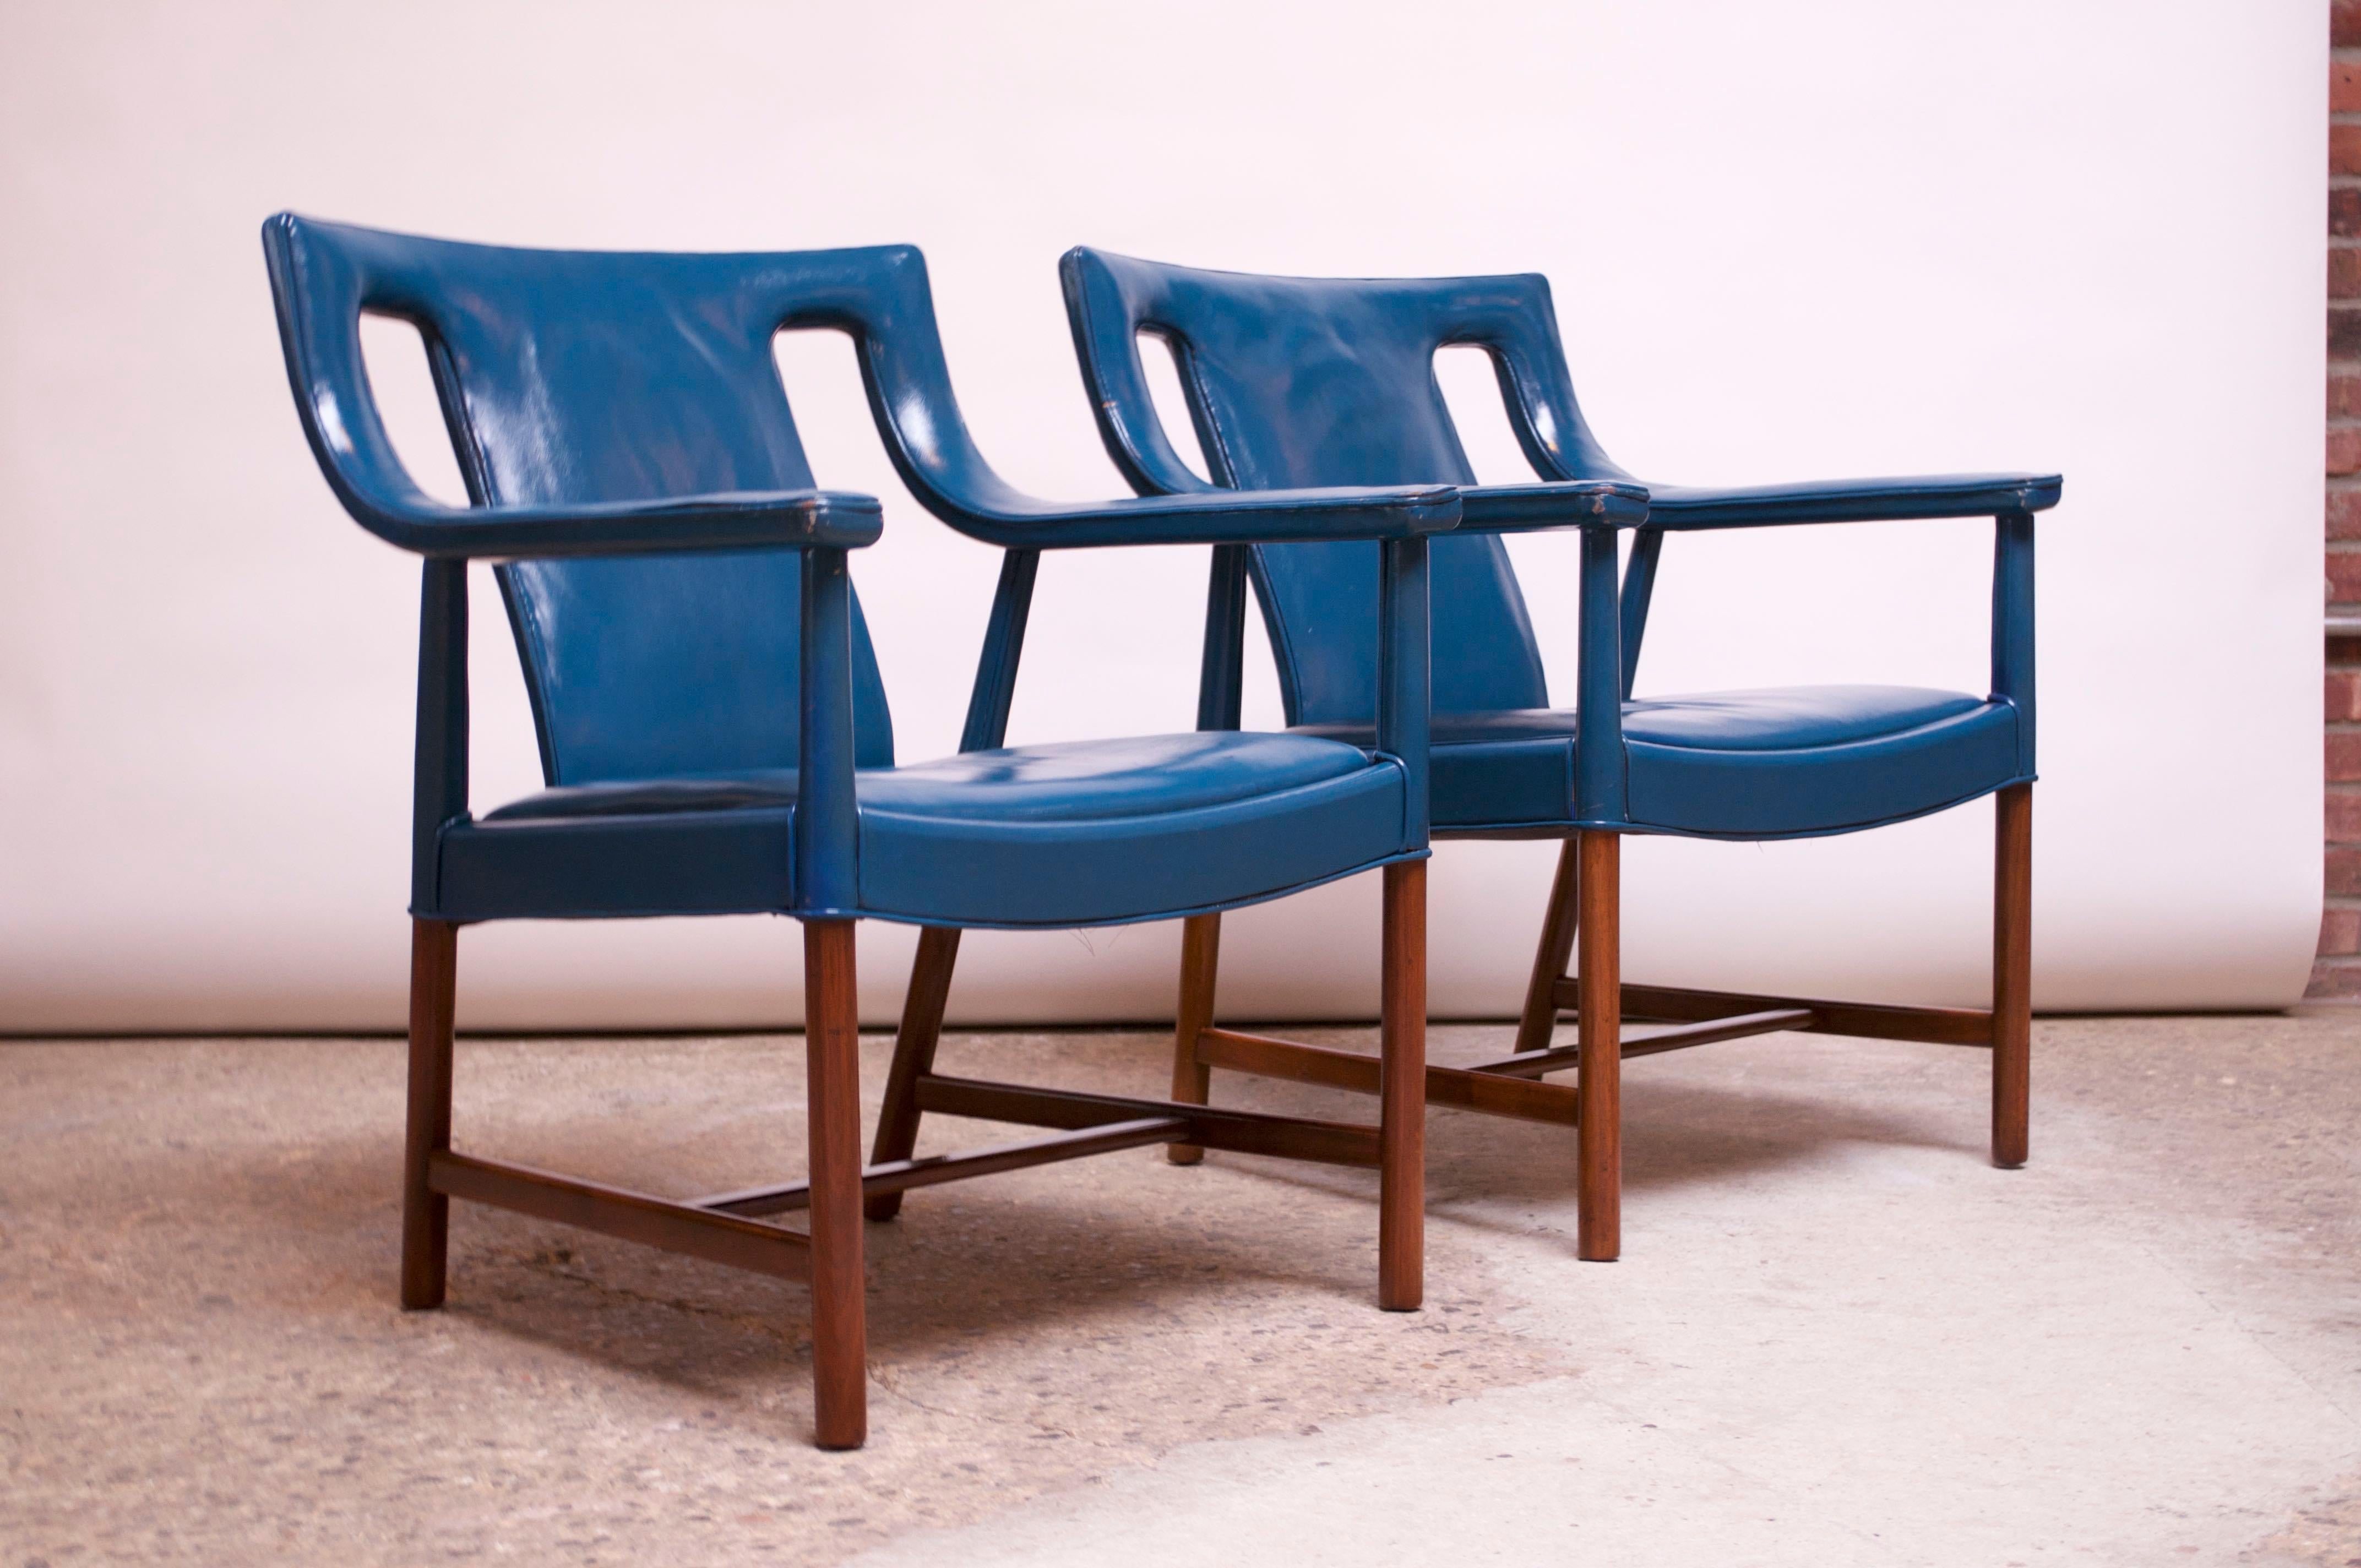 Danish modern armchairs (Model LP48) in blue leather designed by Ejner Larsen and Aksel Bender Madsen and manufactured by Ludvig Pontoppidan, circa 1948-1950. Beautifully aged leather is original and shows wear / patina (scuffs to armrests, back